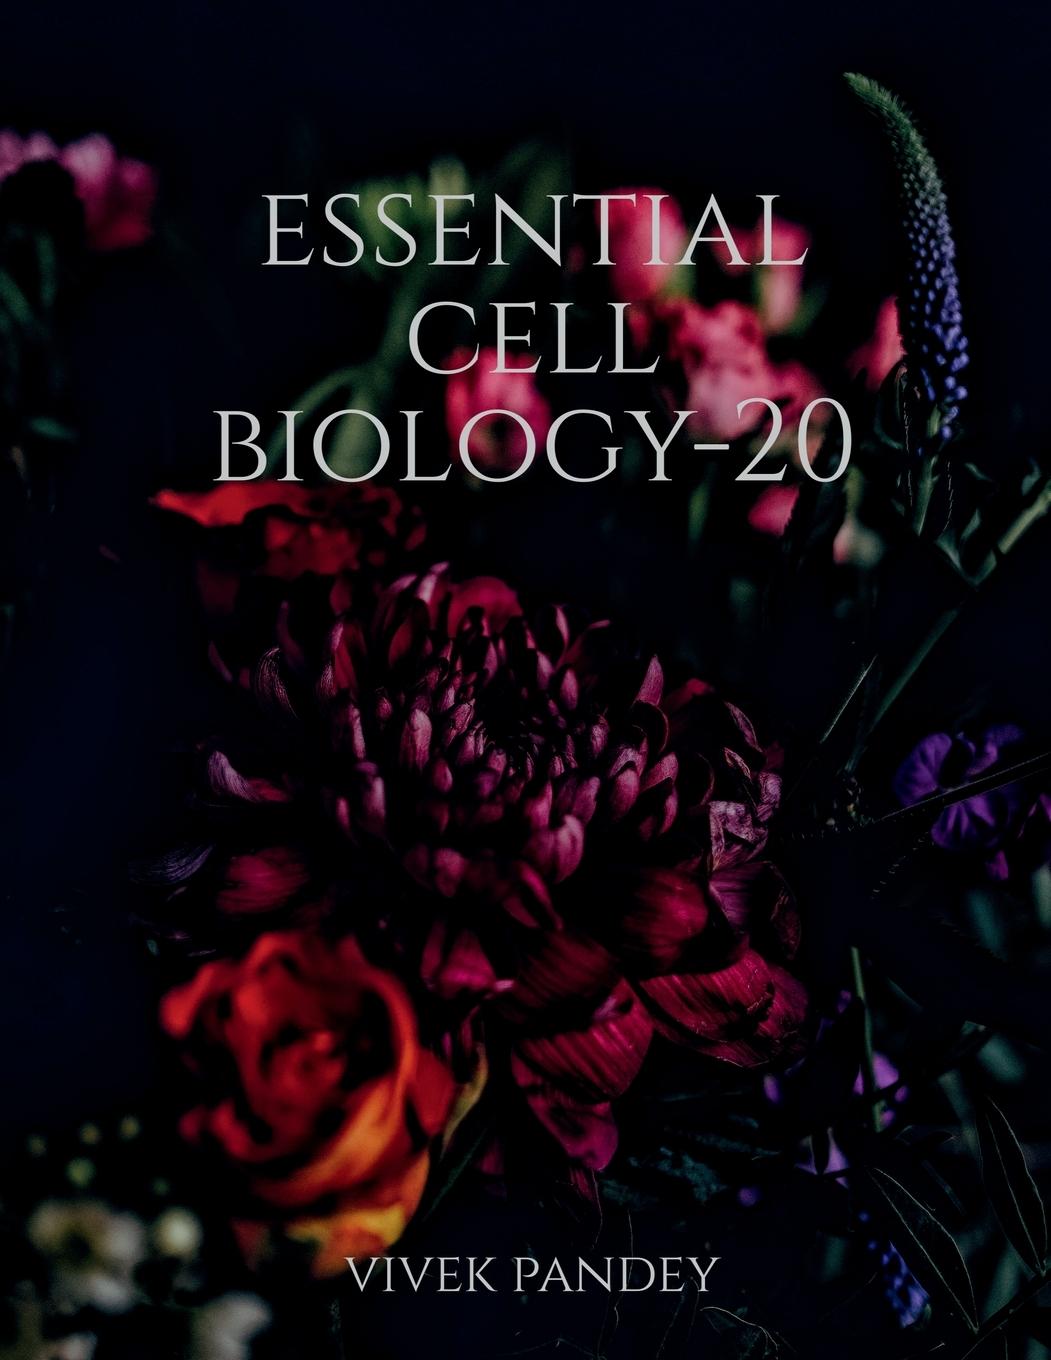 Kniha Essential cell biology-20 